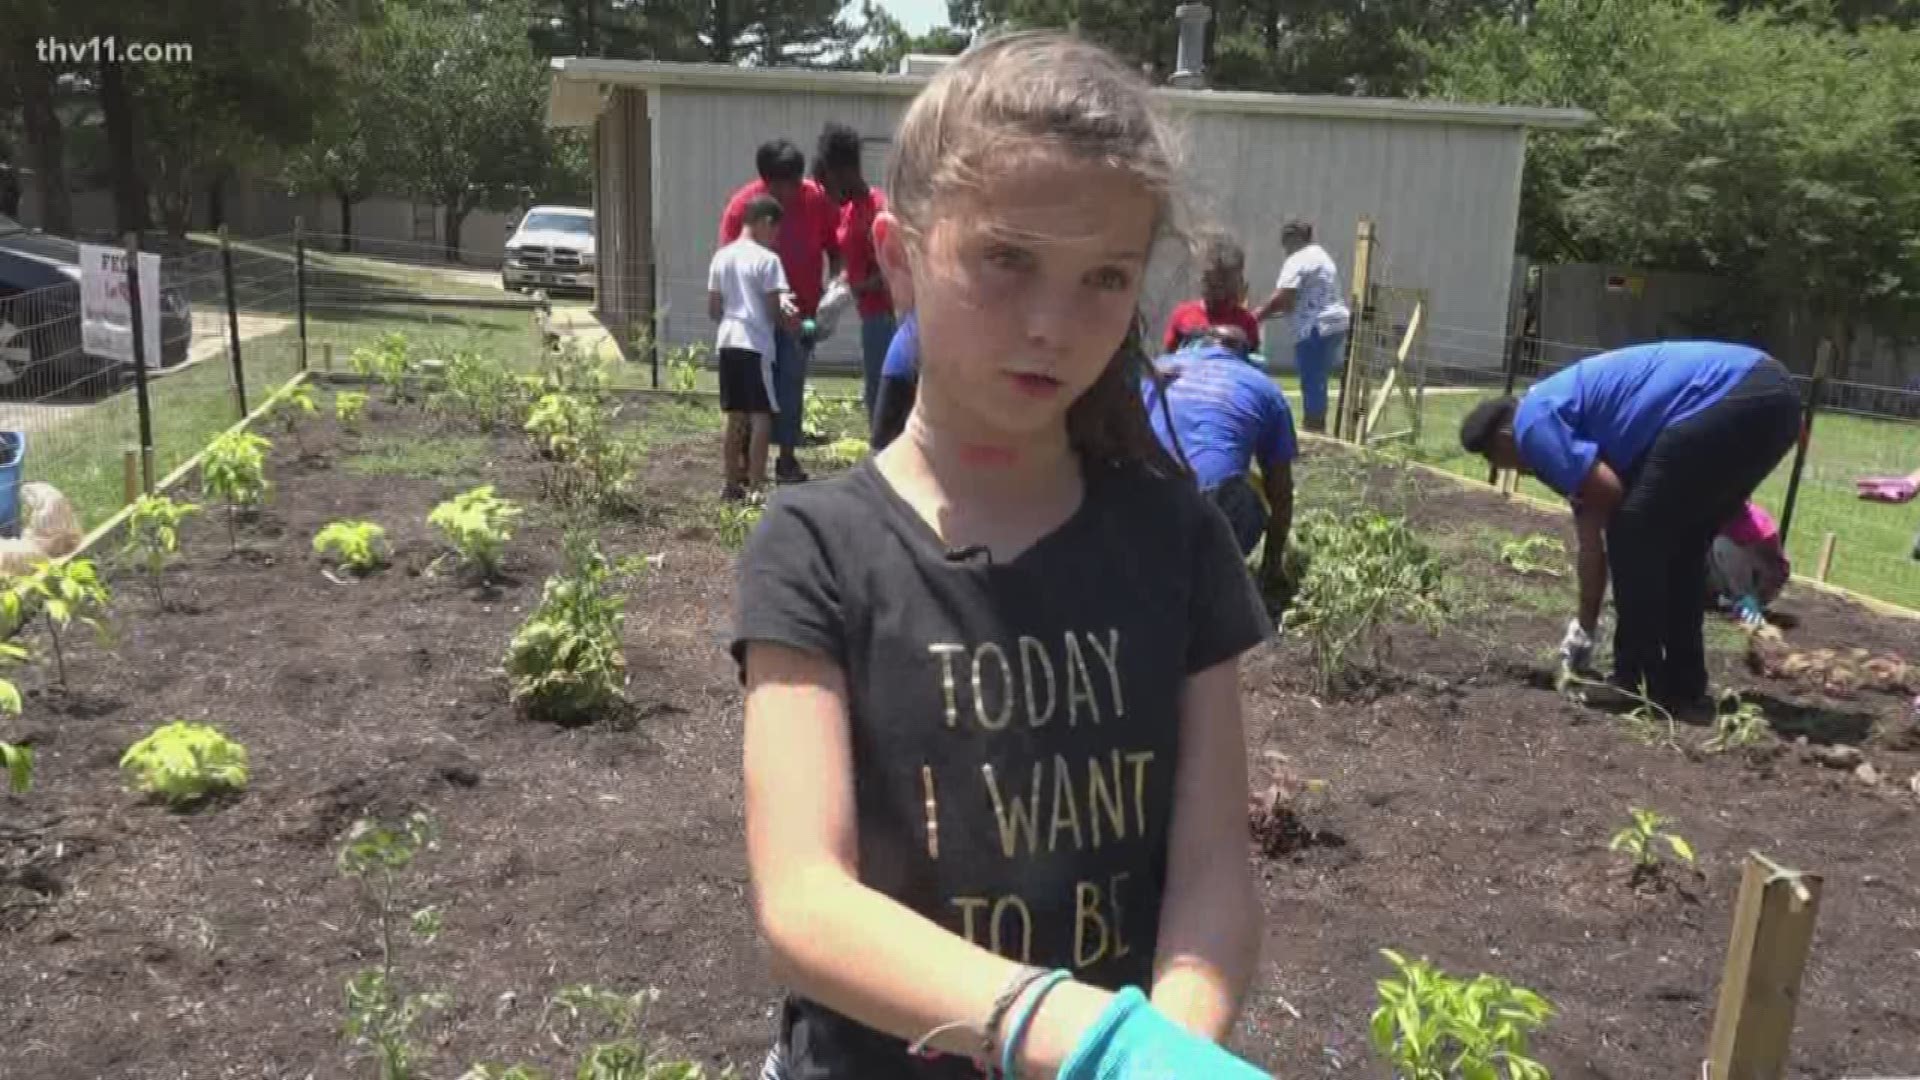 A local nonprofit is working to make sure kids know exactly where the food we eat comes from.